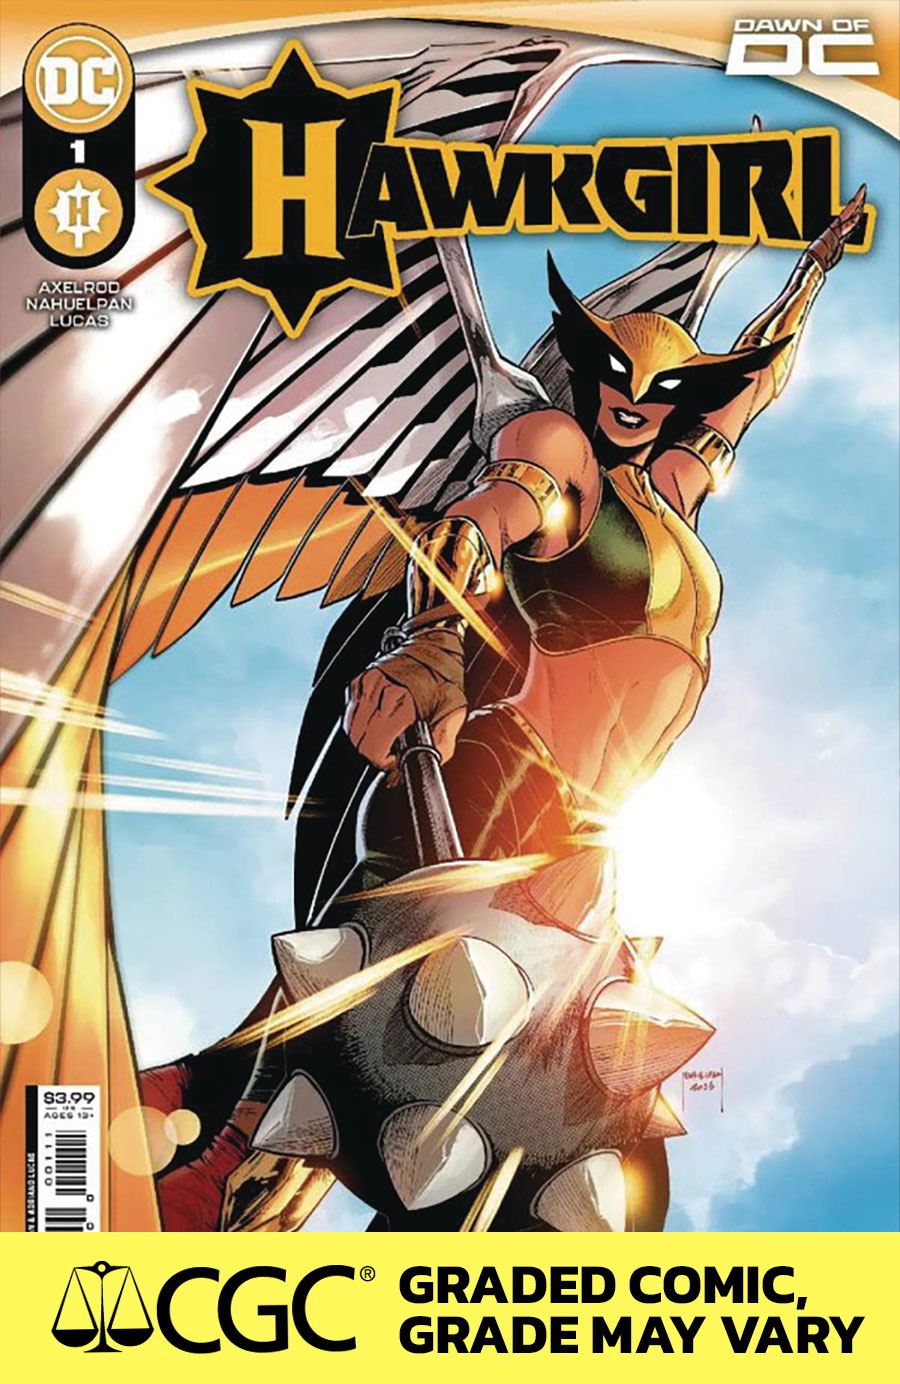 Hawkgirl Vol 2 #1 Cover F CGC Graded 9.6 Or Higher